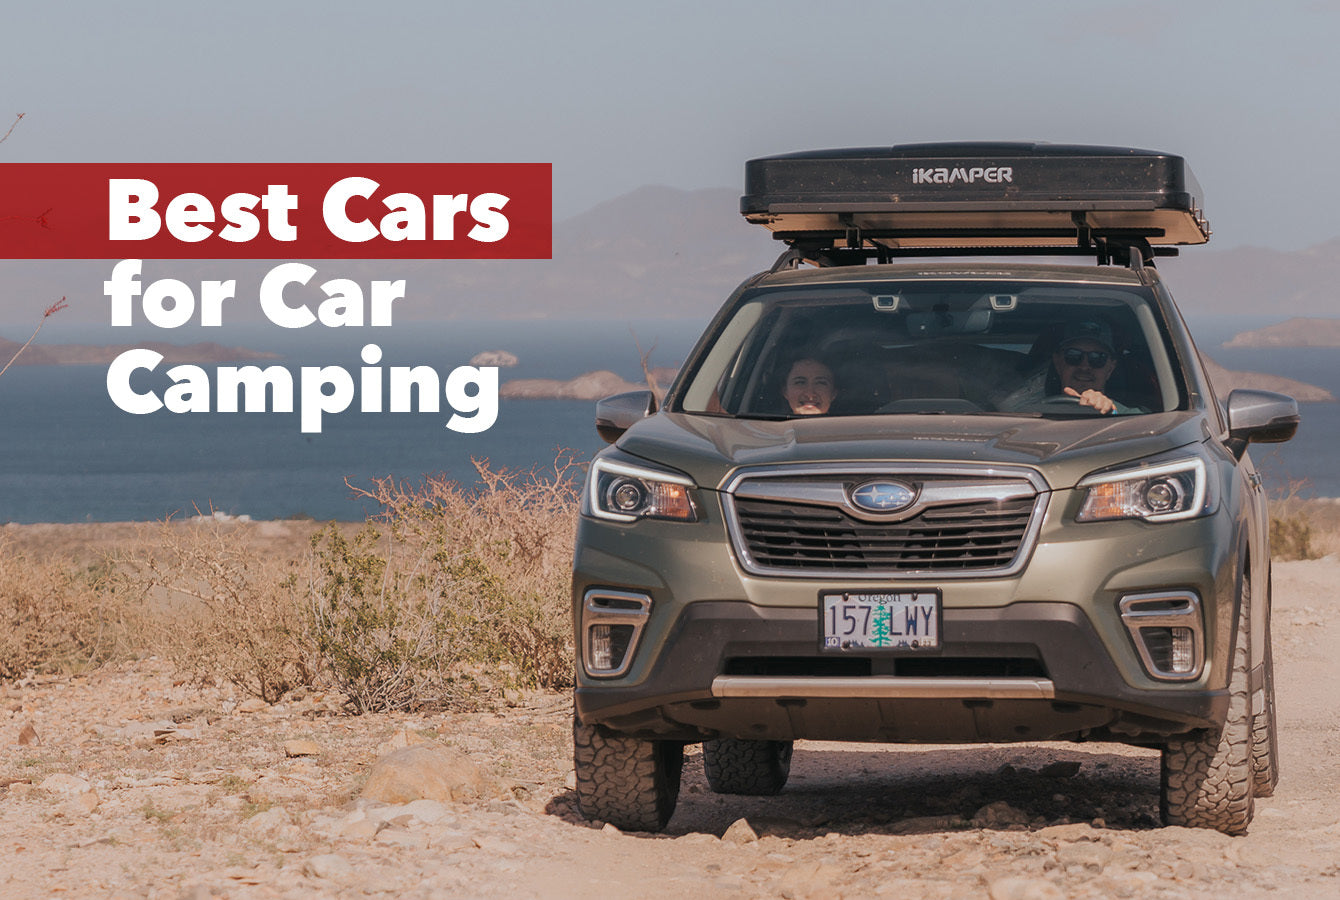 Best Cars for Camping  The Ultimate Guide for Camping Vehicles